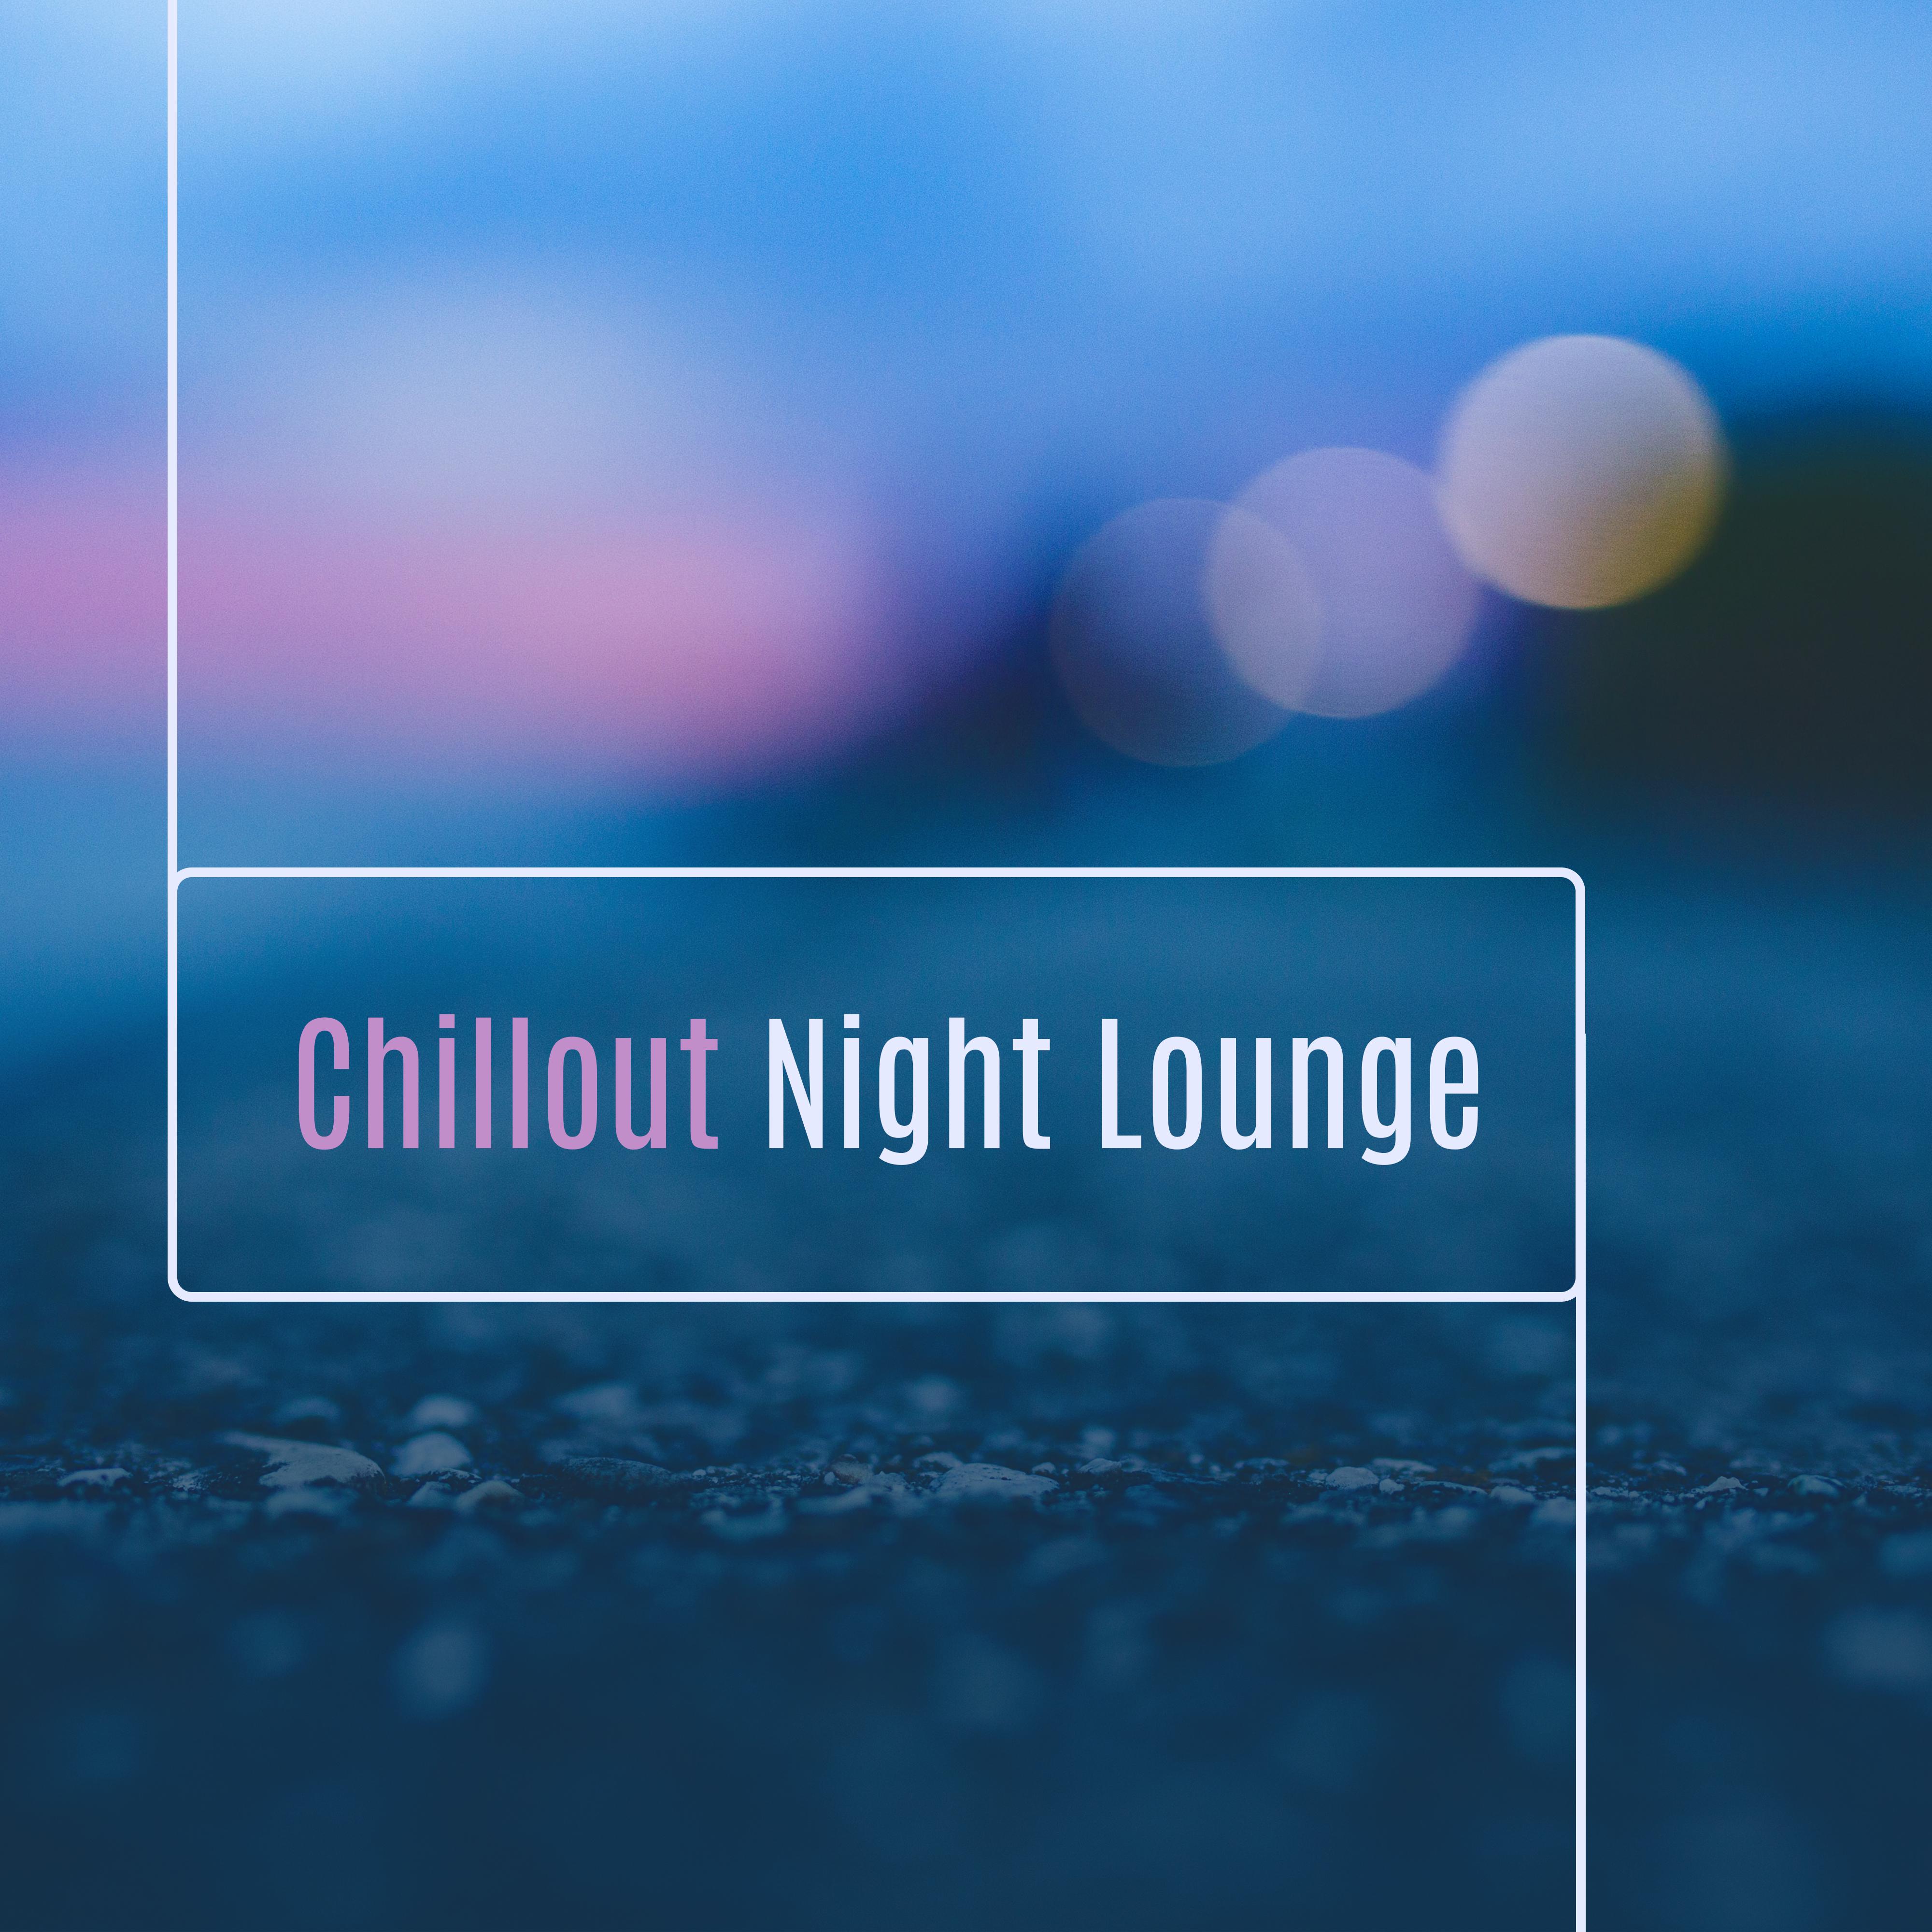 Chillout Night Lounge – Chill Out Music, Relax Lounge, Party Music, Electronic Beats